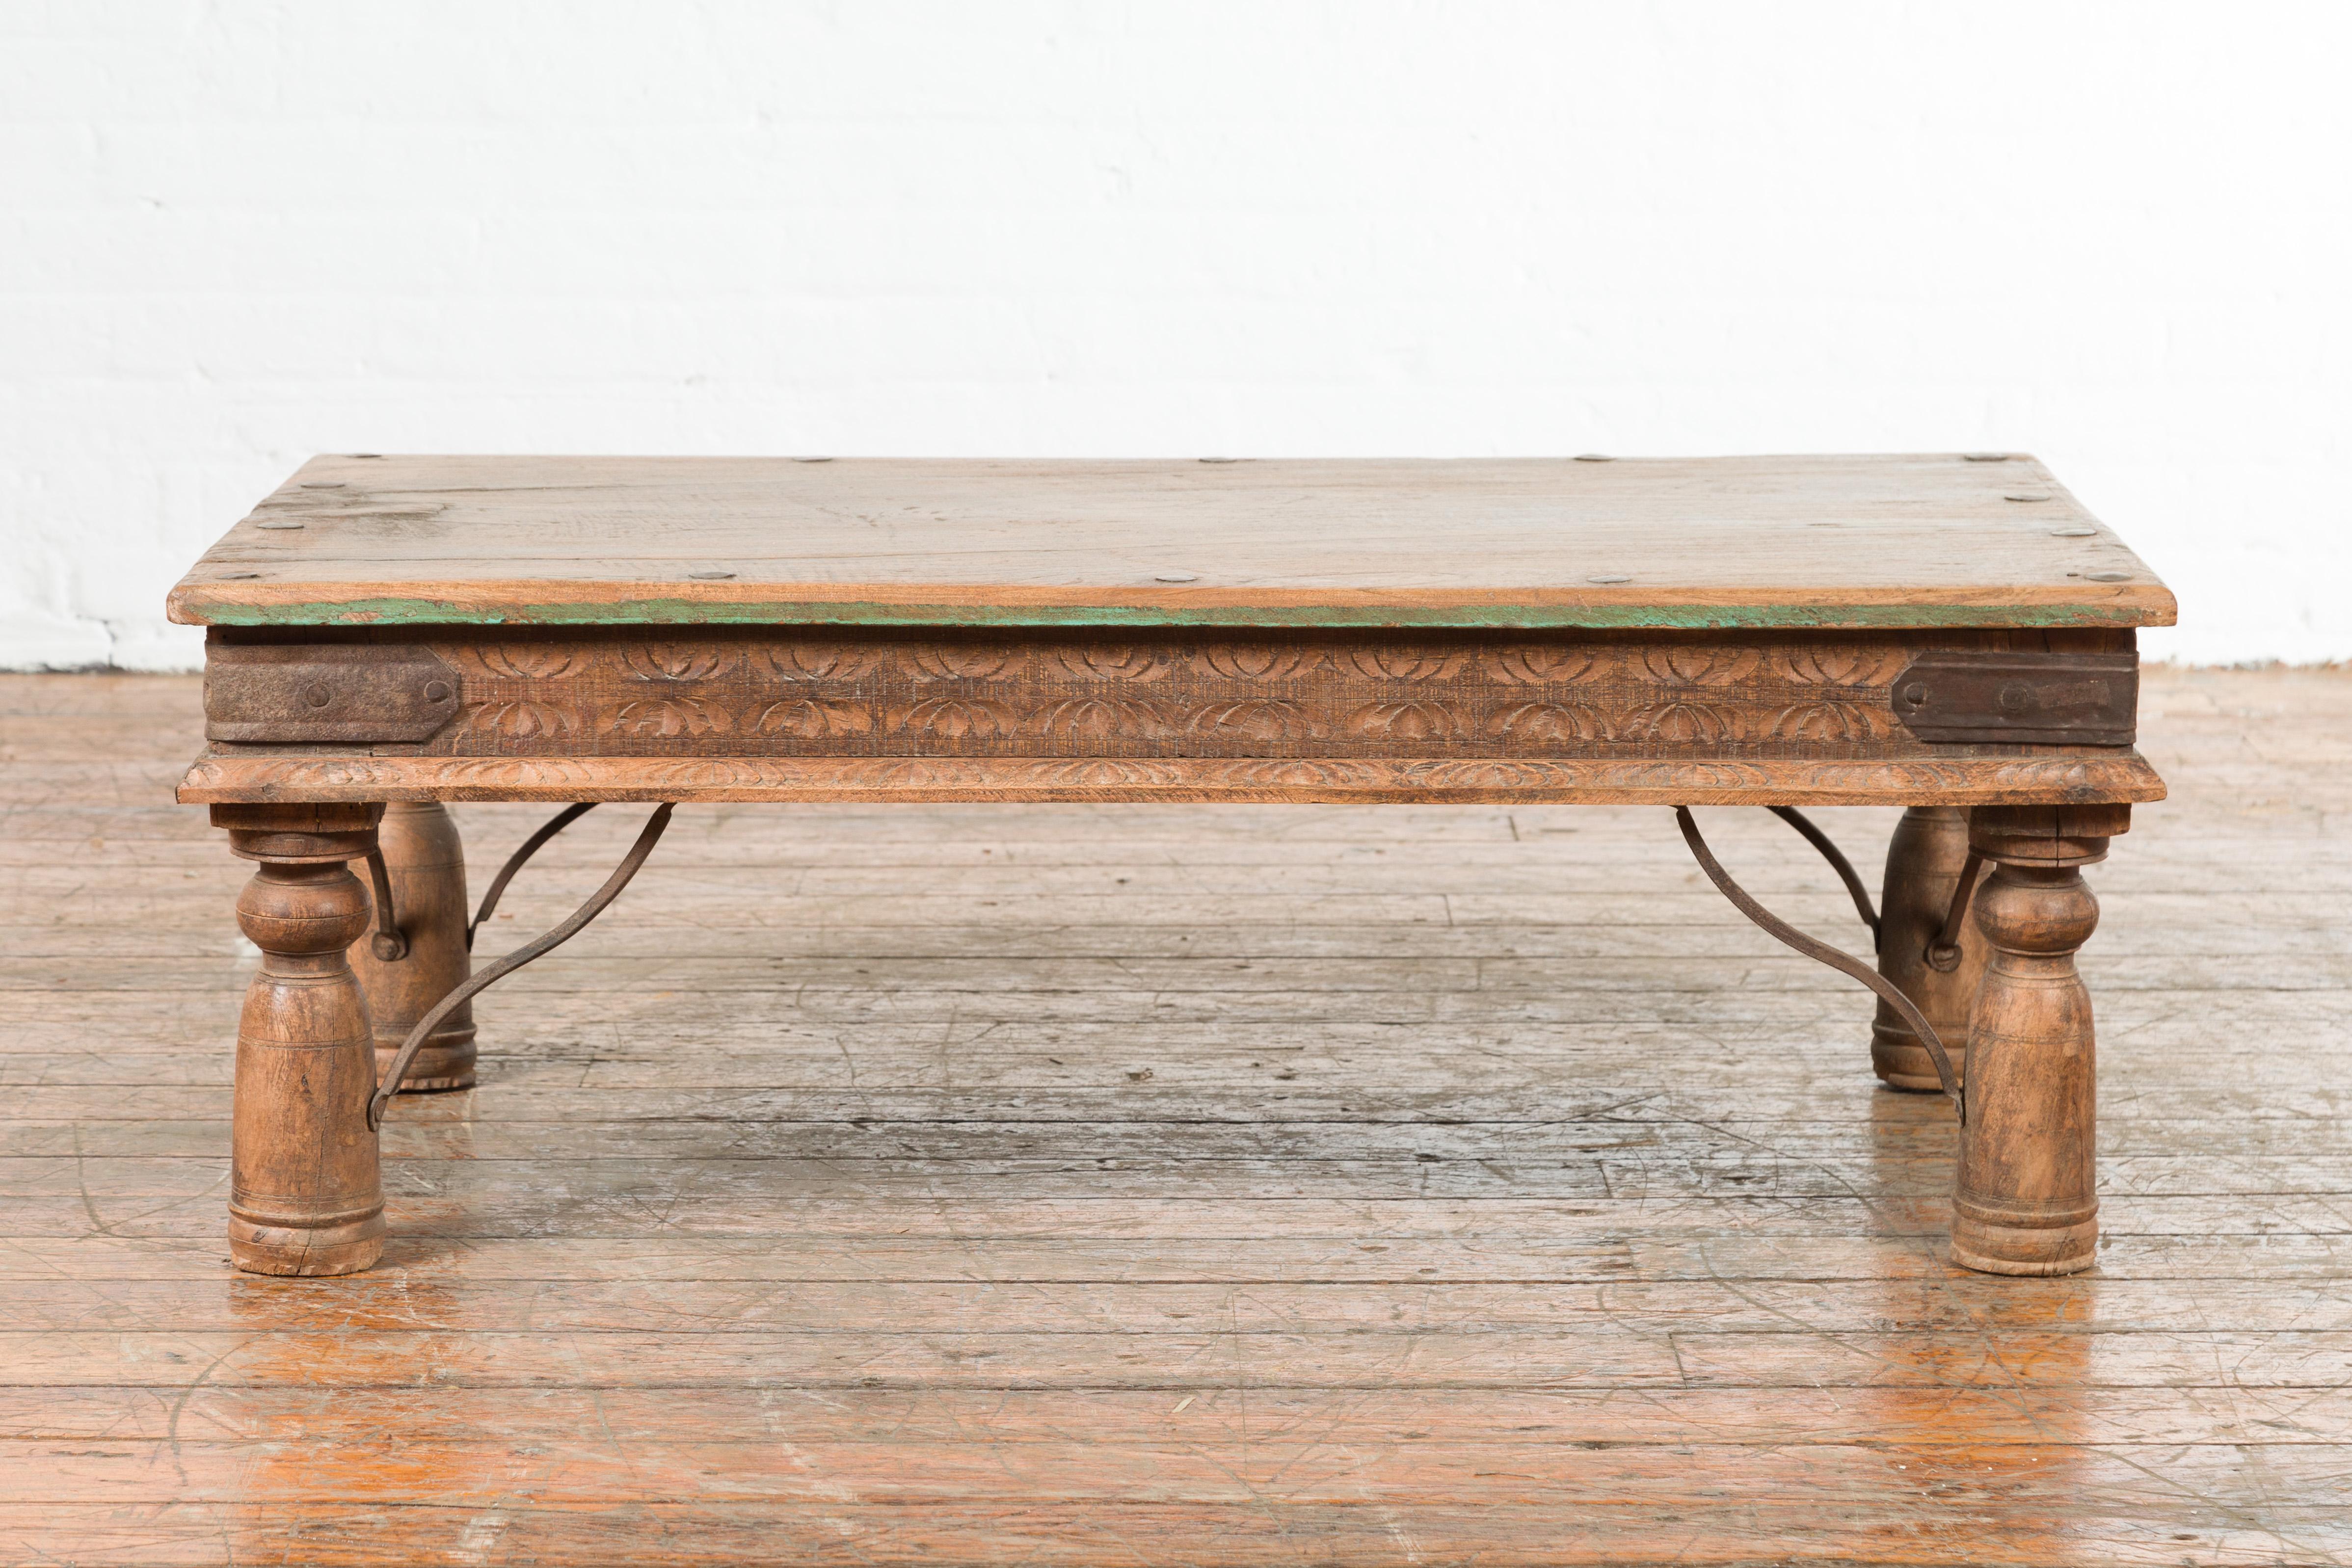 An Indian antique small coffee table from the 19th century, with iron accents, green paint and carved apron. Created in India during the 19th century, this coffee table features a rectangular single planked top with iron studs and traces of green